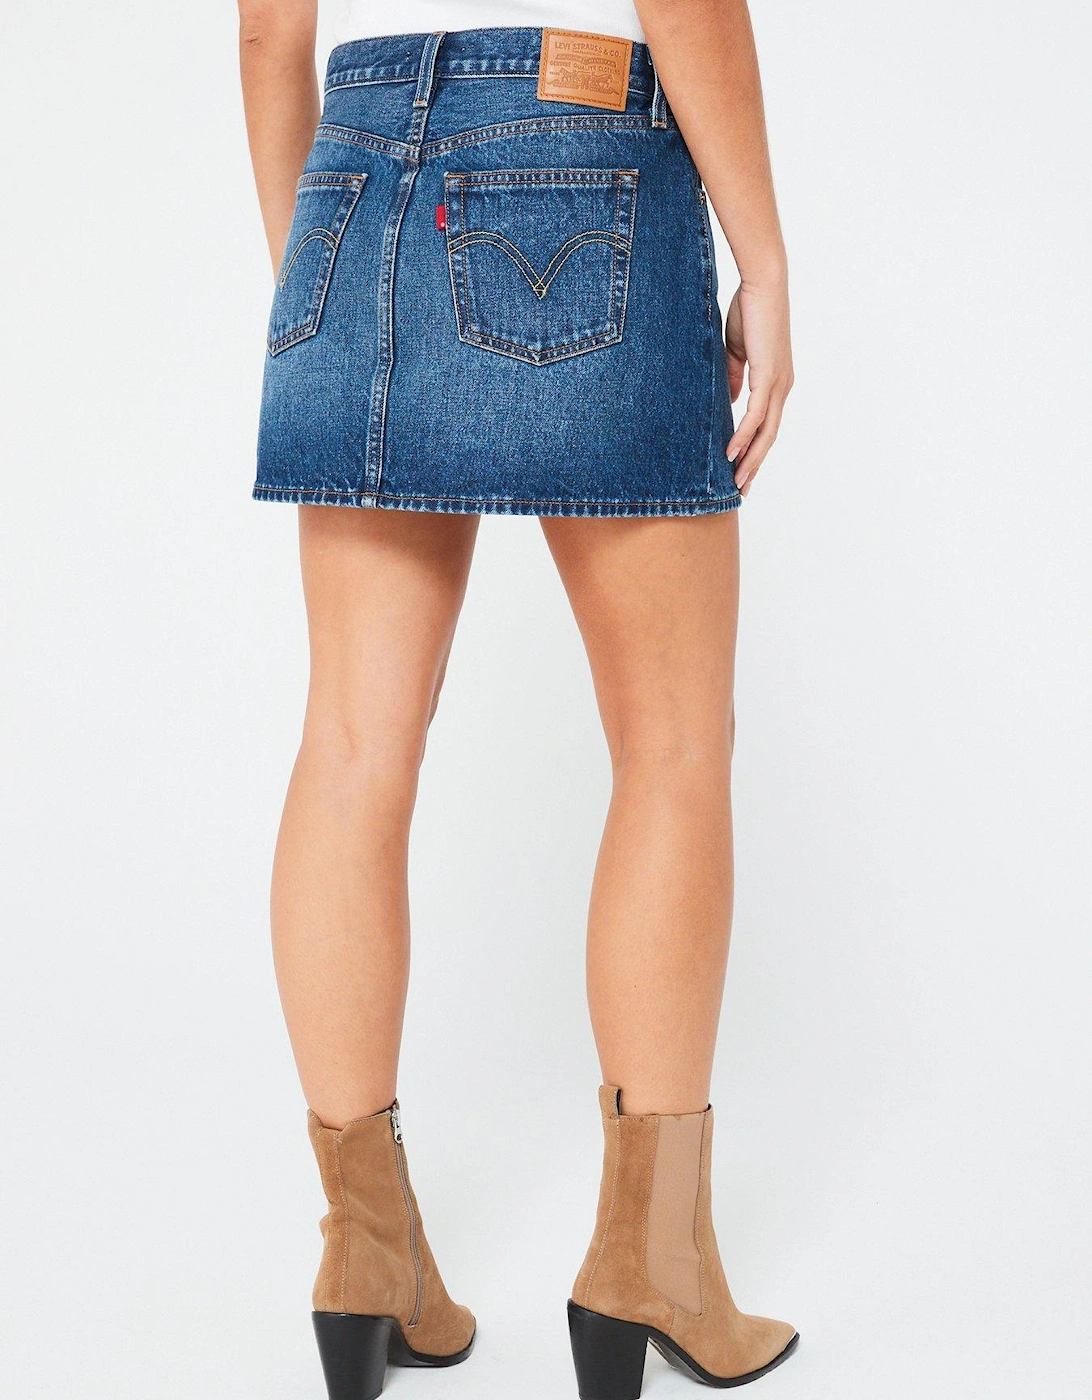 Icon Denim Skirt - Lost Peace Of Mind